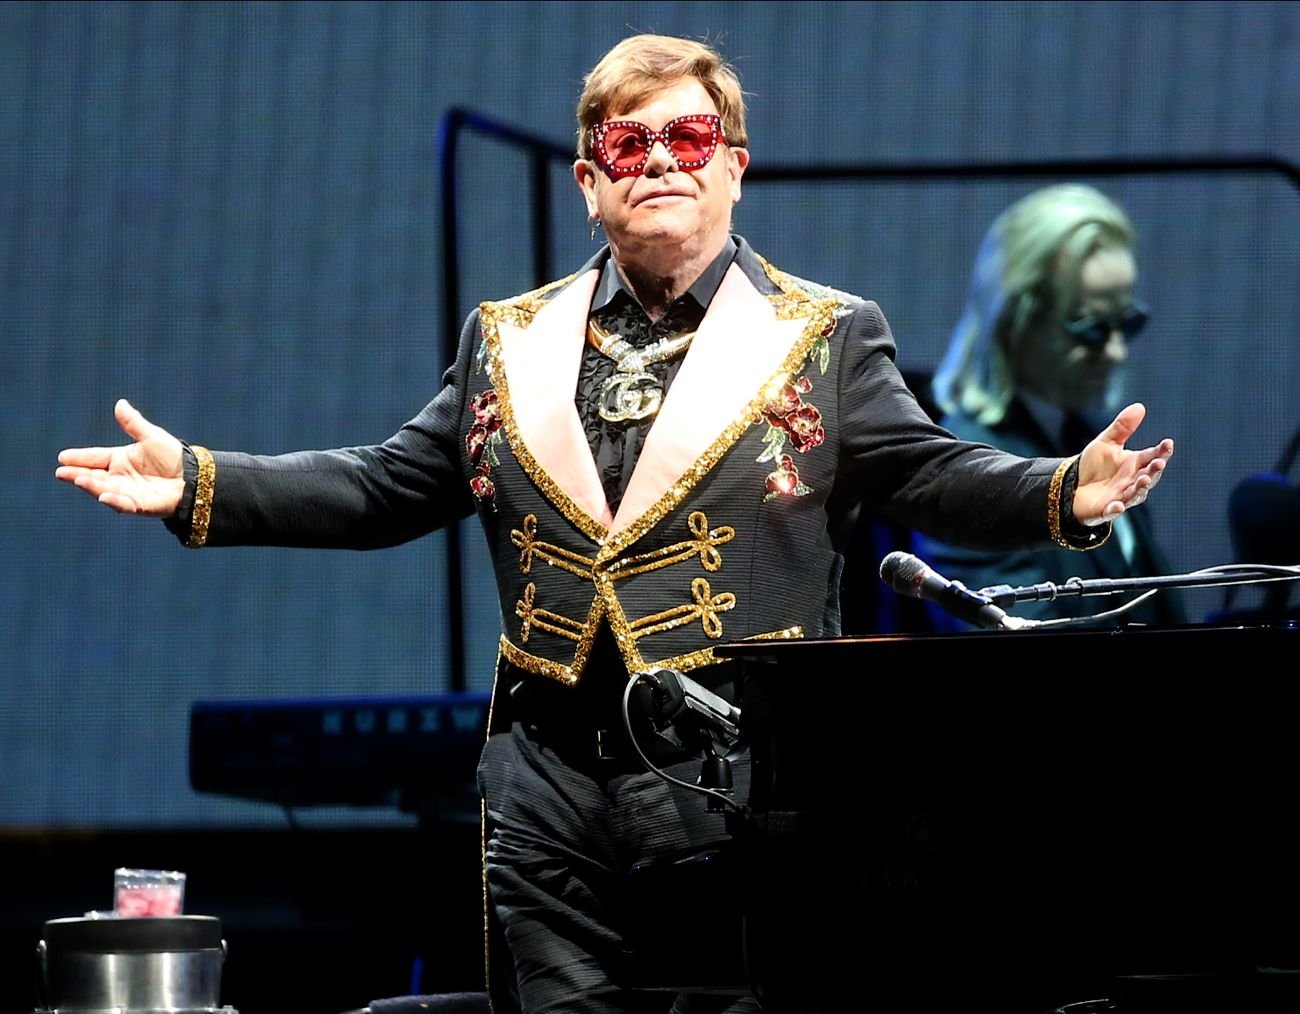 Elton John wears a black embroidered suit and red sunglasses. He stands in front of a piano.